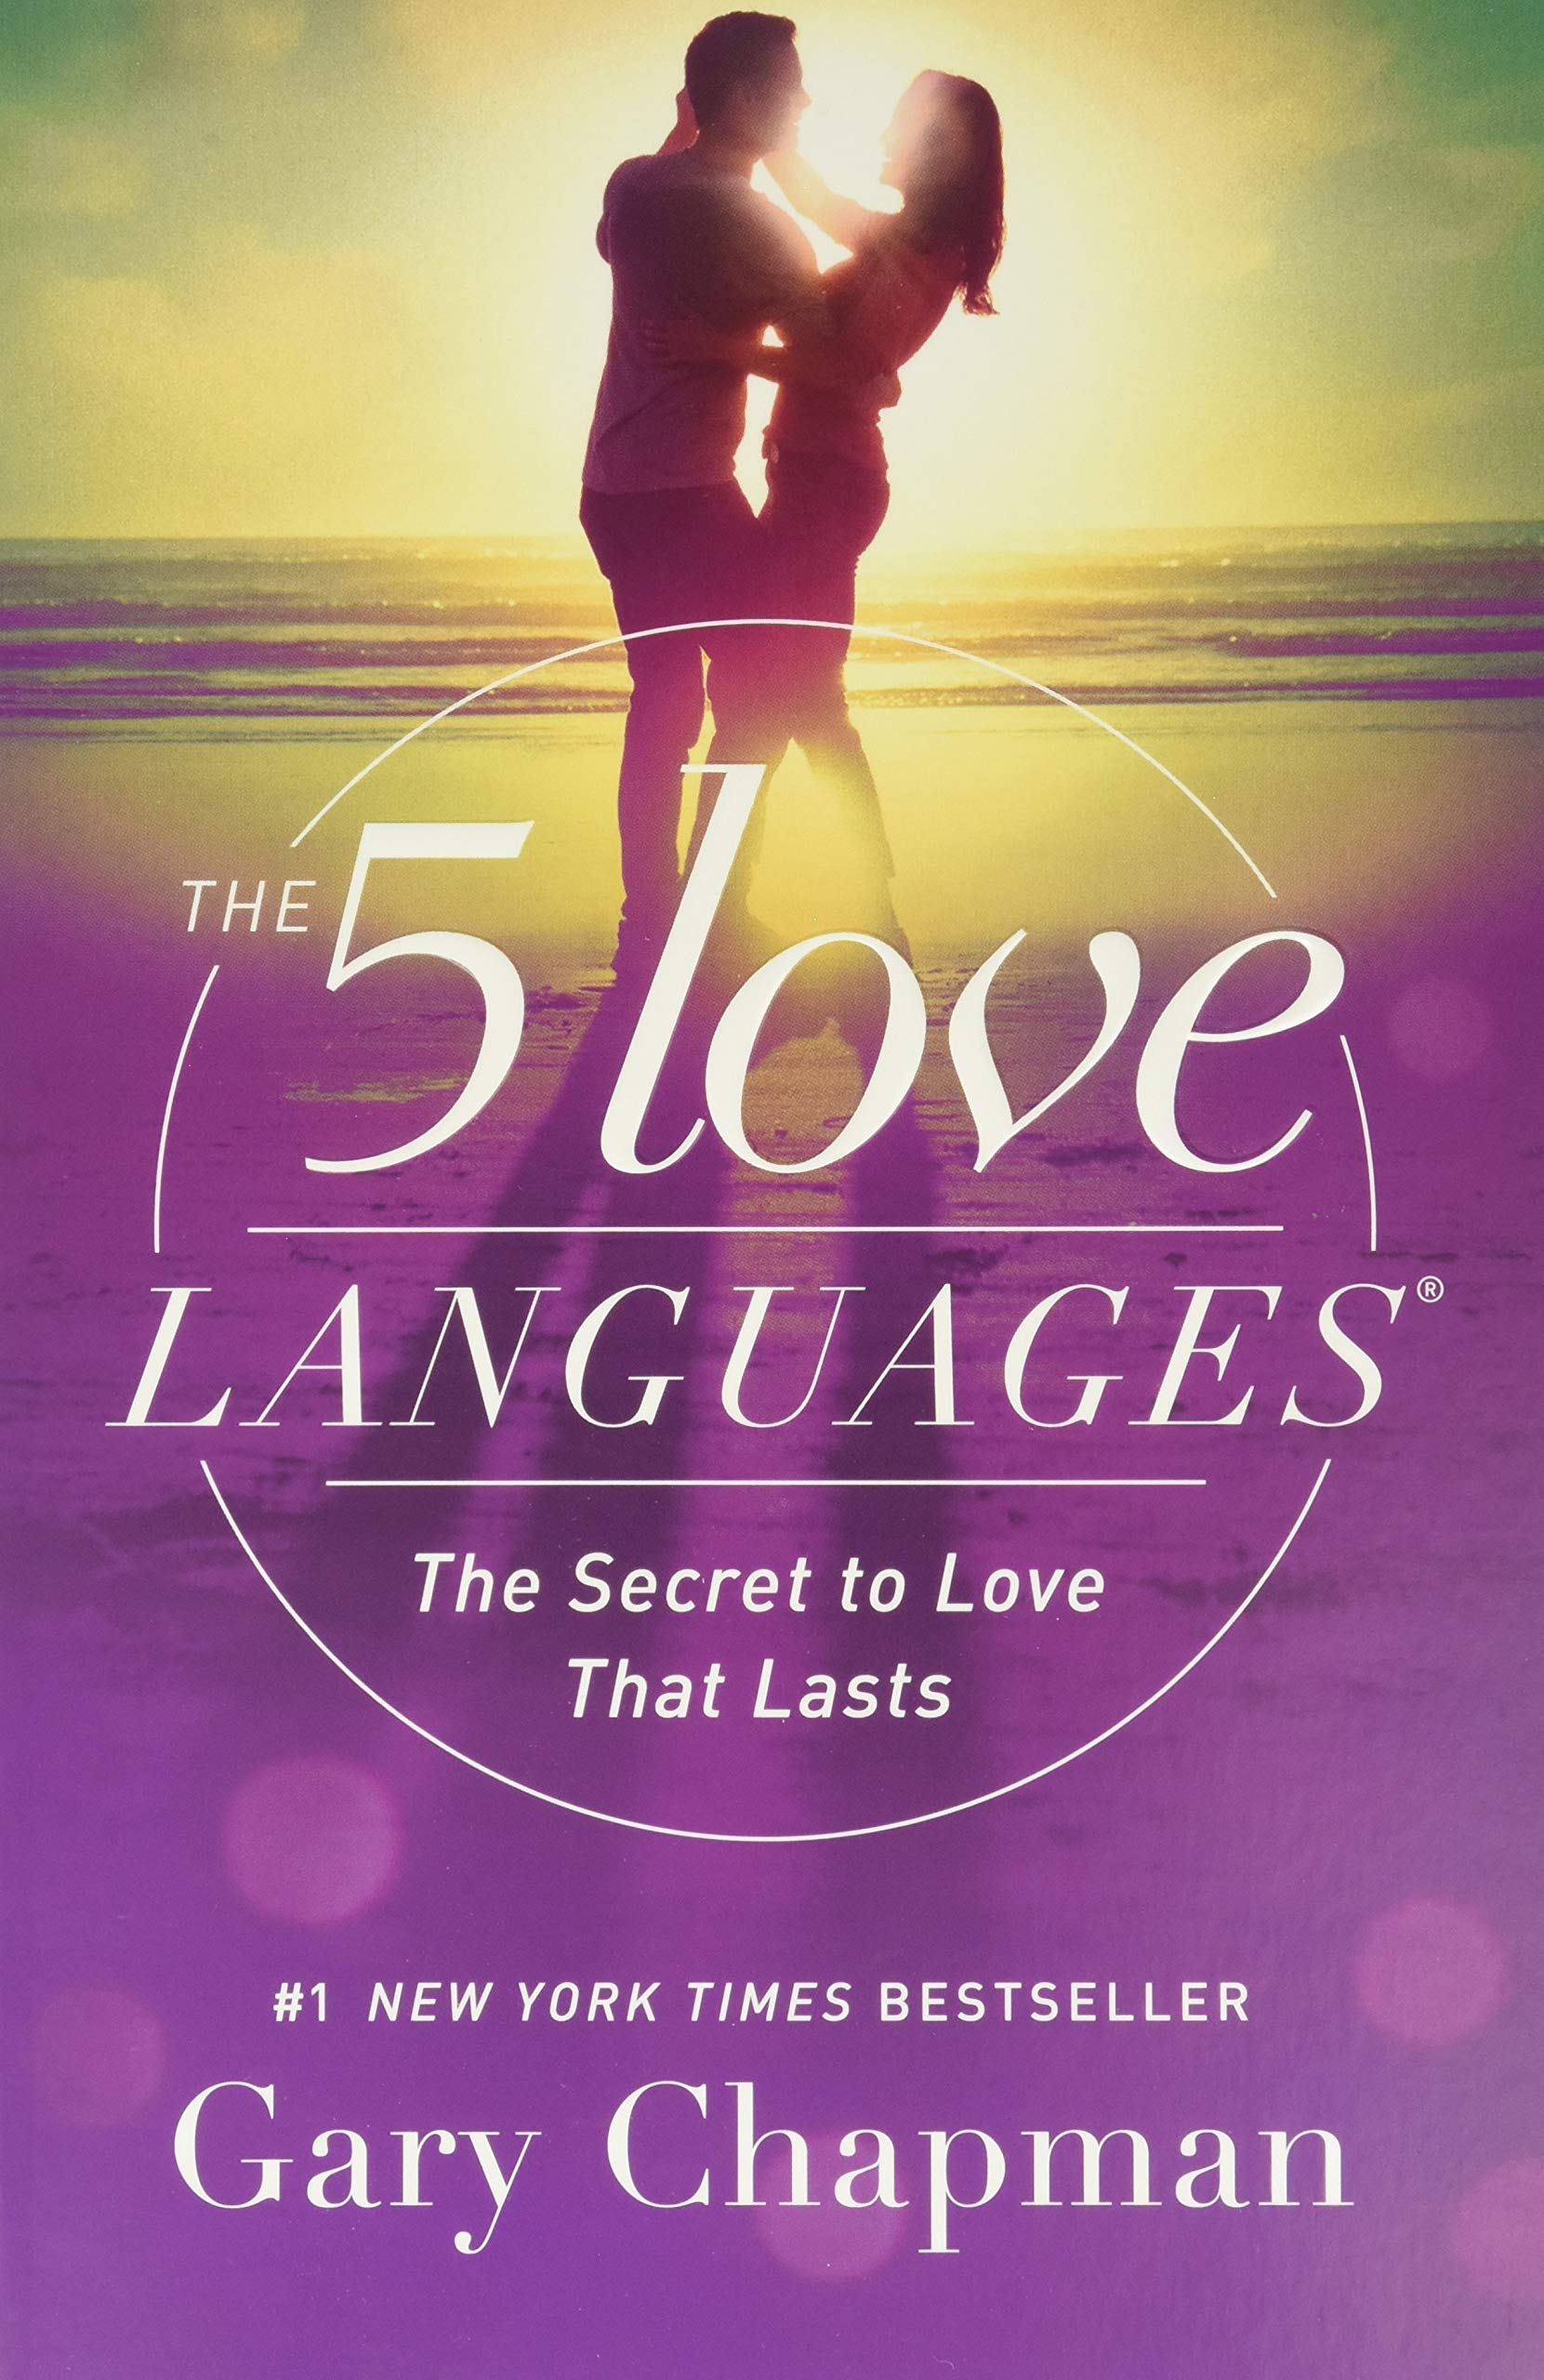 the 5 love languages book cover